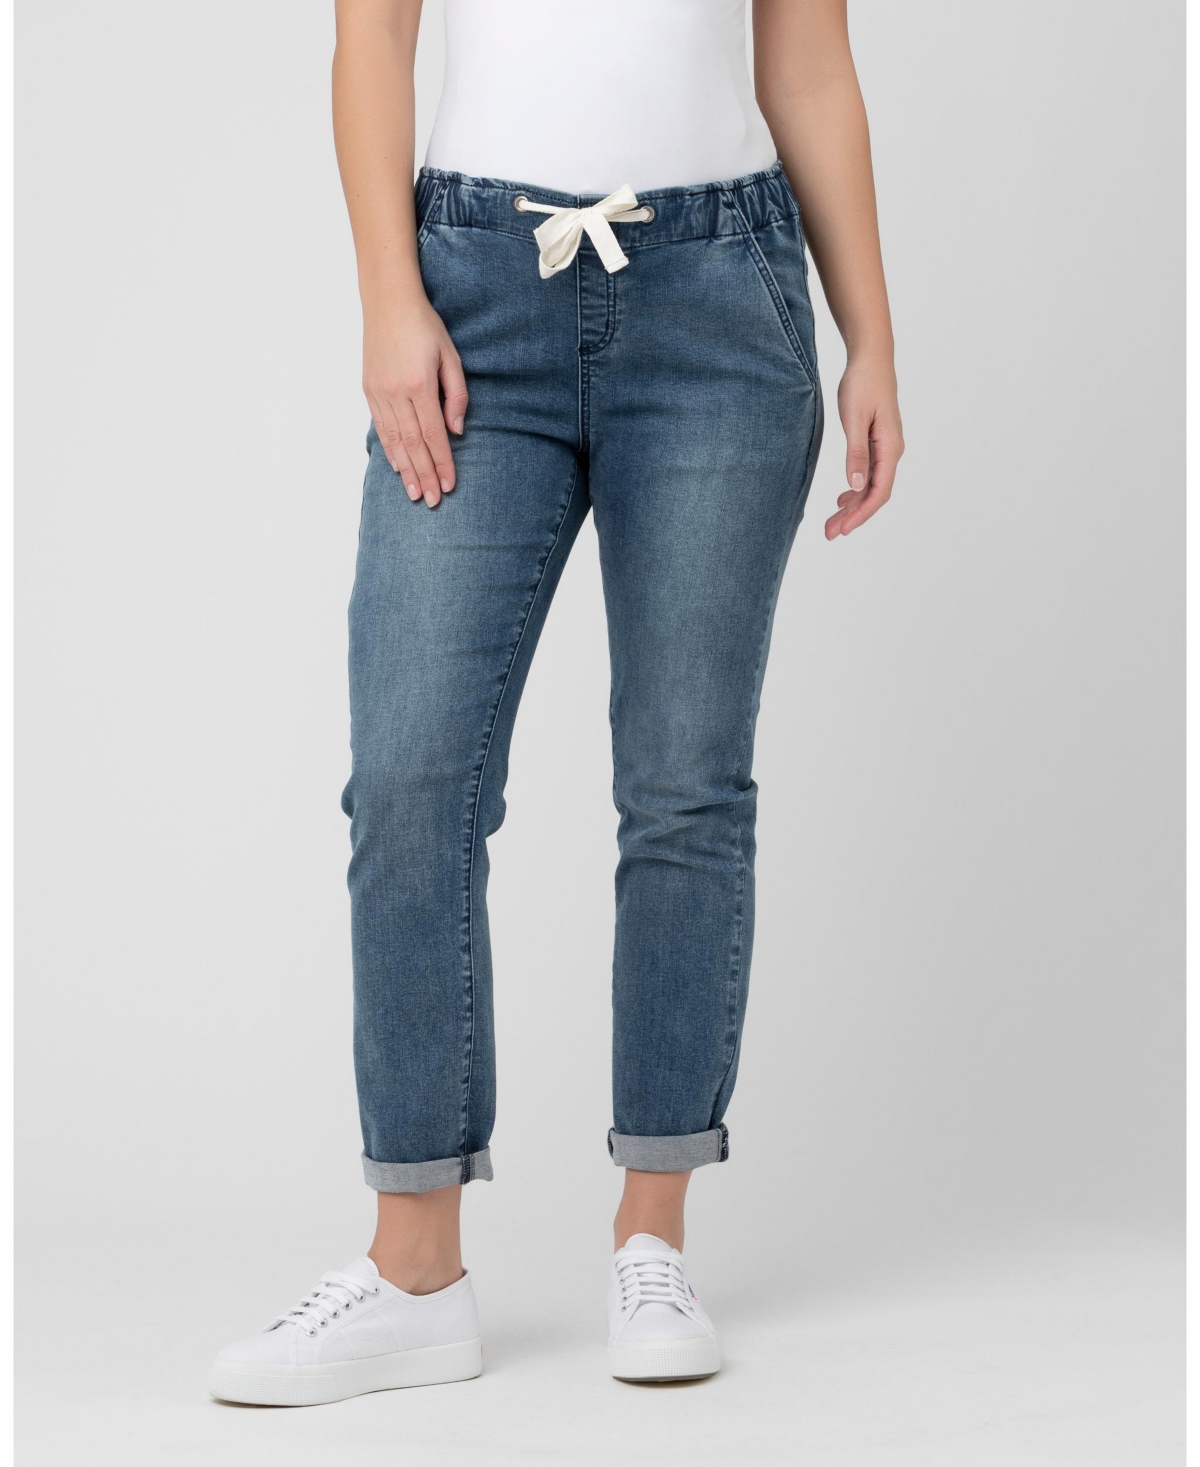 RIPE MATERNITY MATERNITY COMFY DENIM JOGGER WITH TIE BLUE